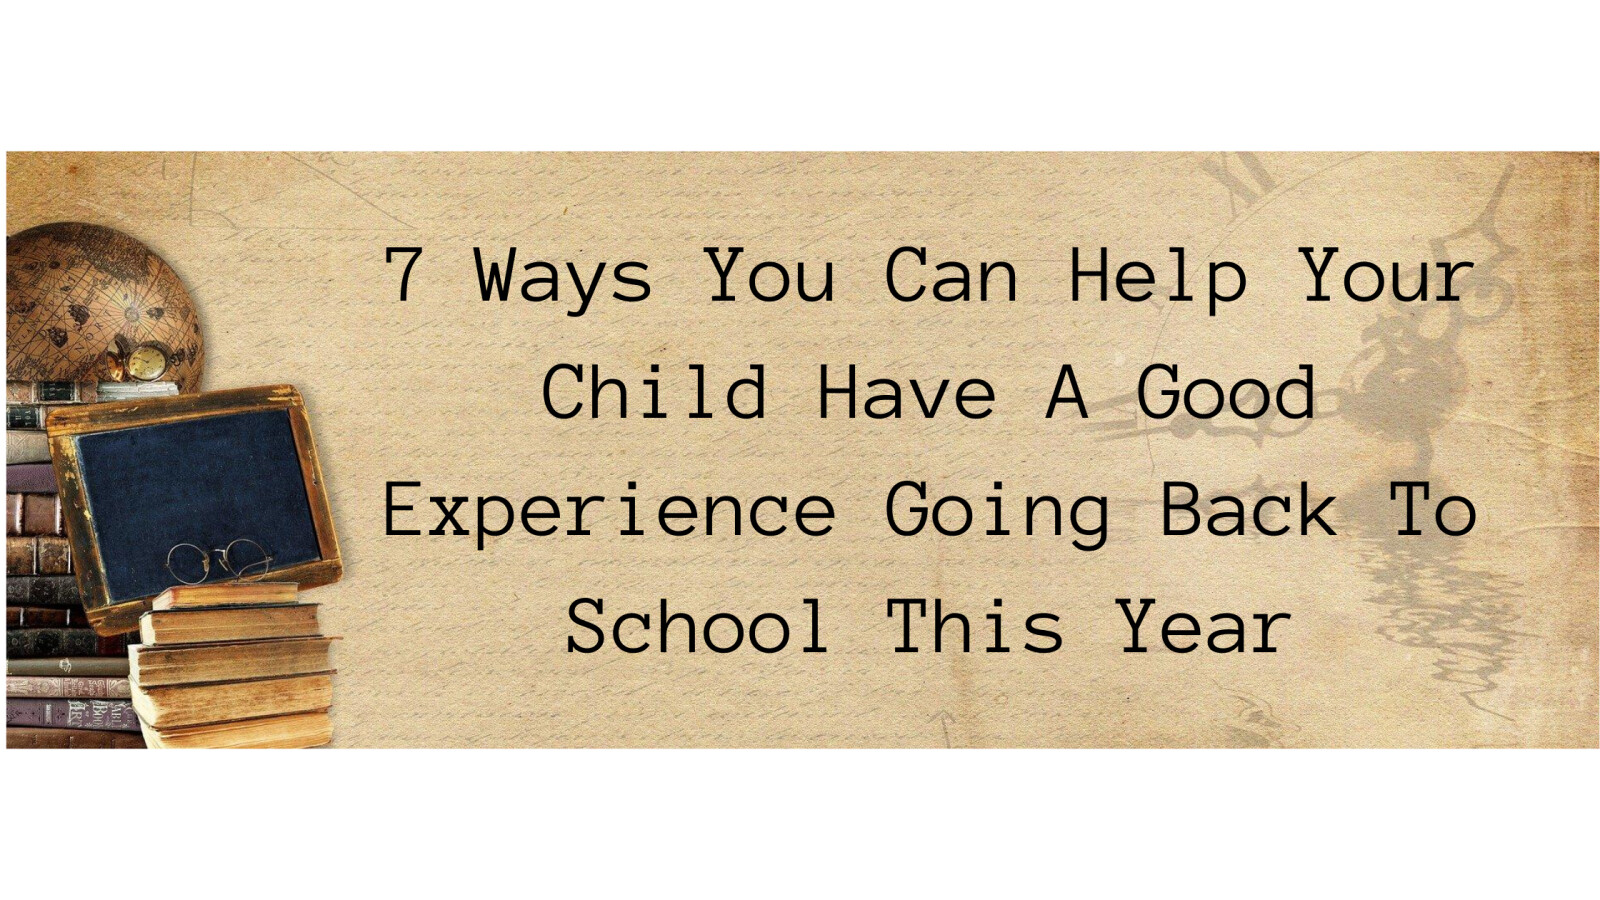 7  Ways You Can Help Your Child Have A Good Experience Going Back To School This Year